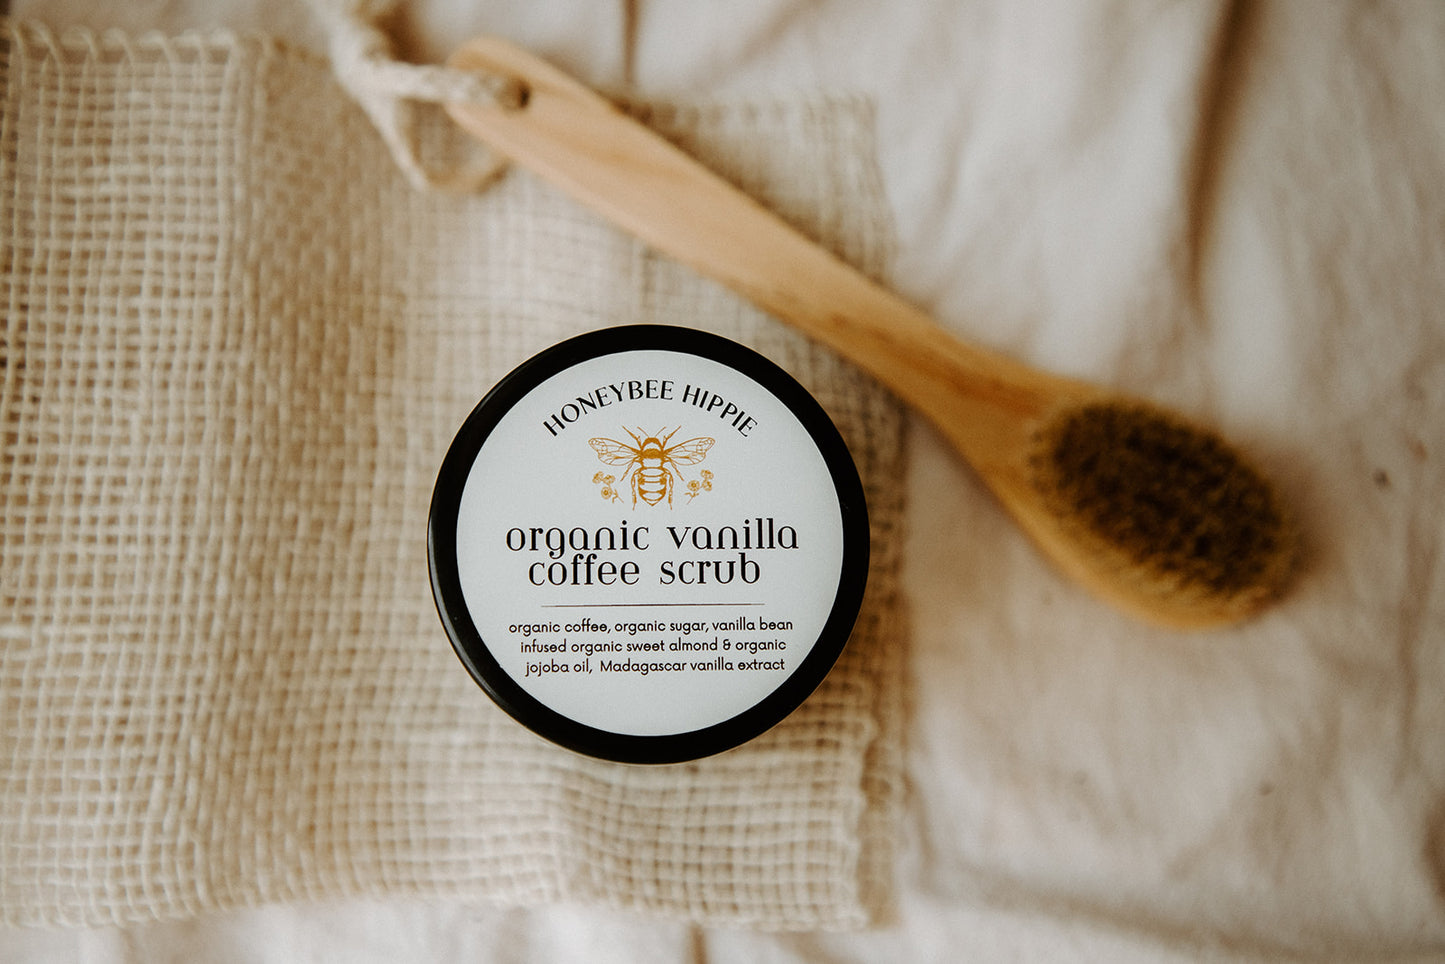 a close of up the label on honeybee hippie's organic vanilla natural body scrub made to exfoliate and hydrate skin with natural organic ingredients